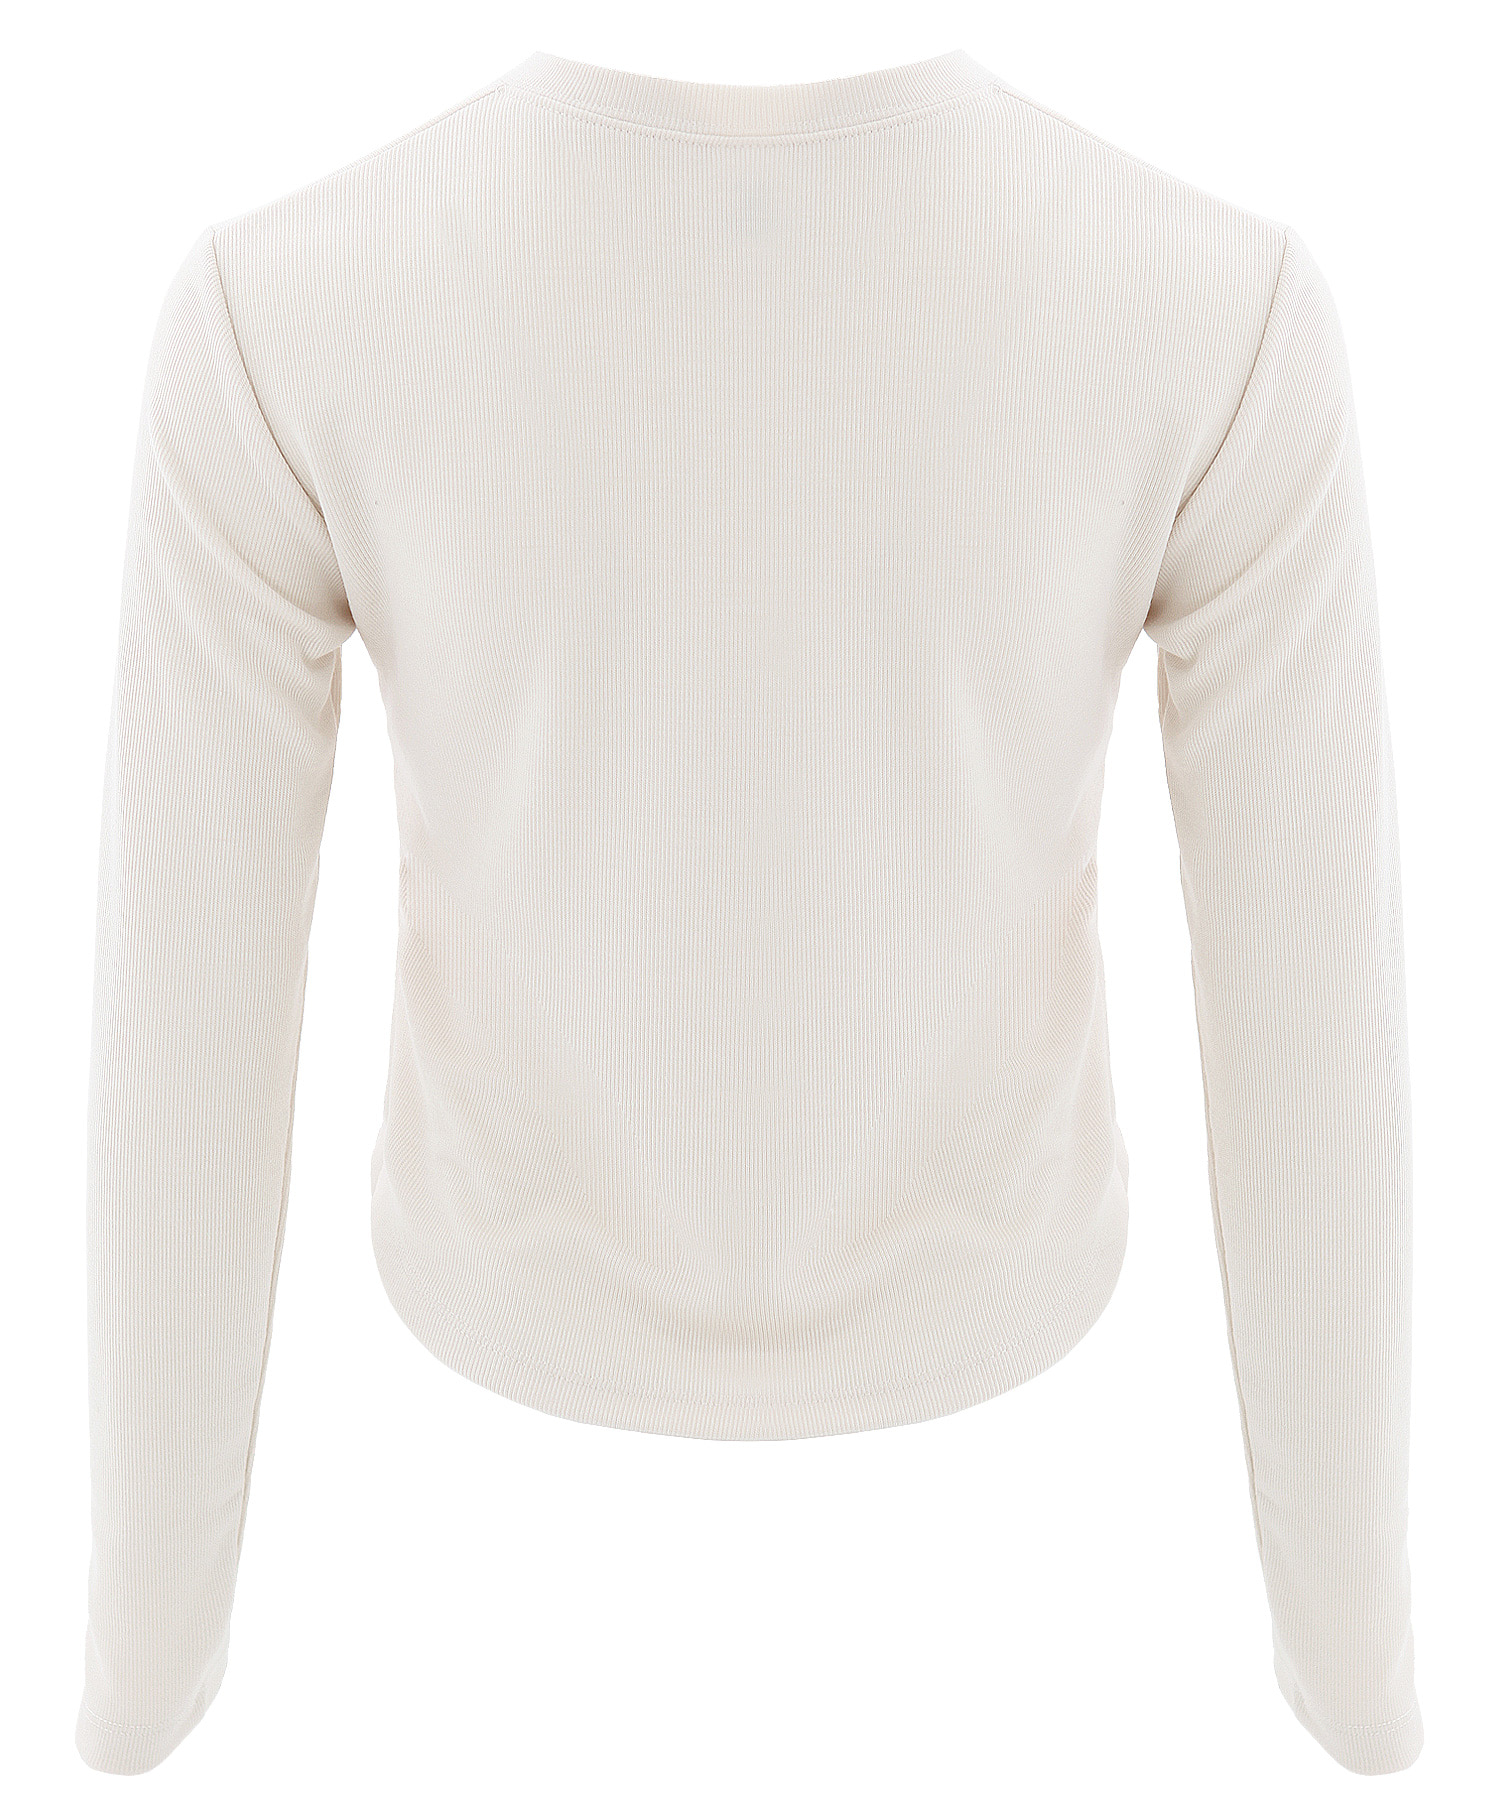 ANDANT-SHIRT IN IVORY Pre-order delivery on June 5